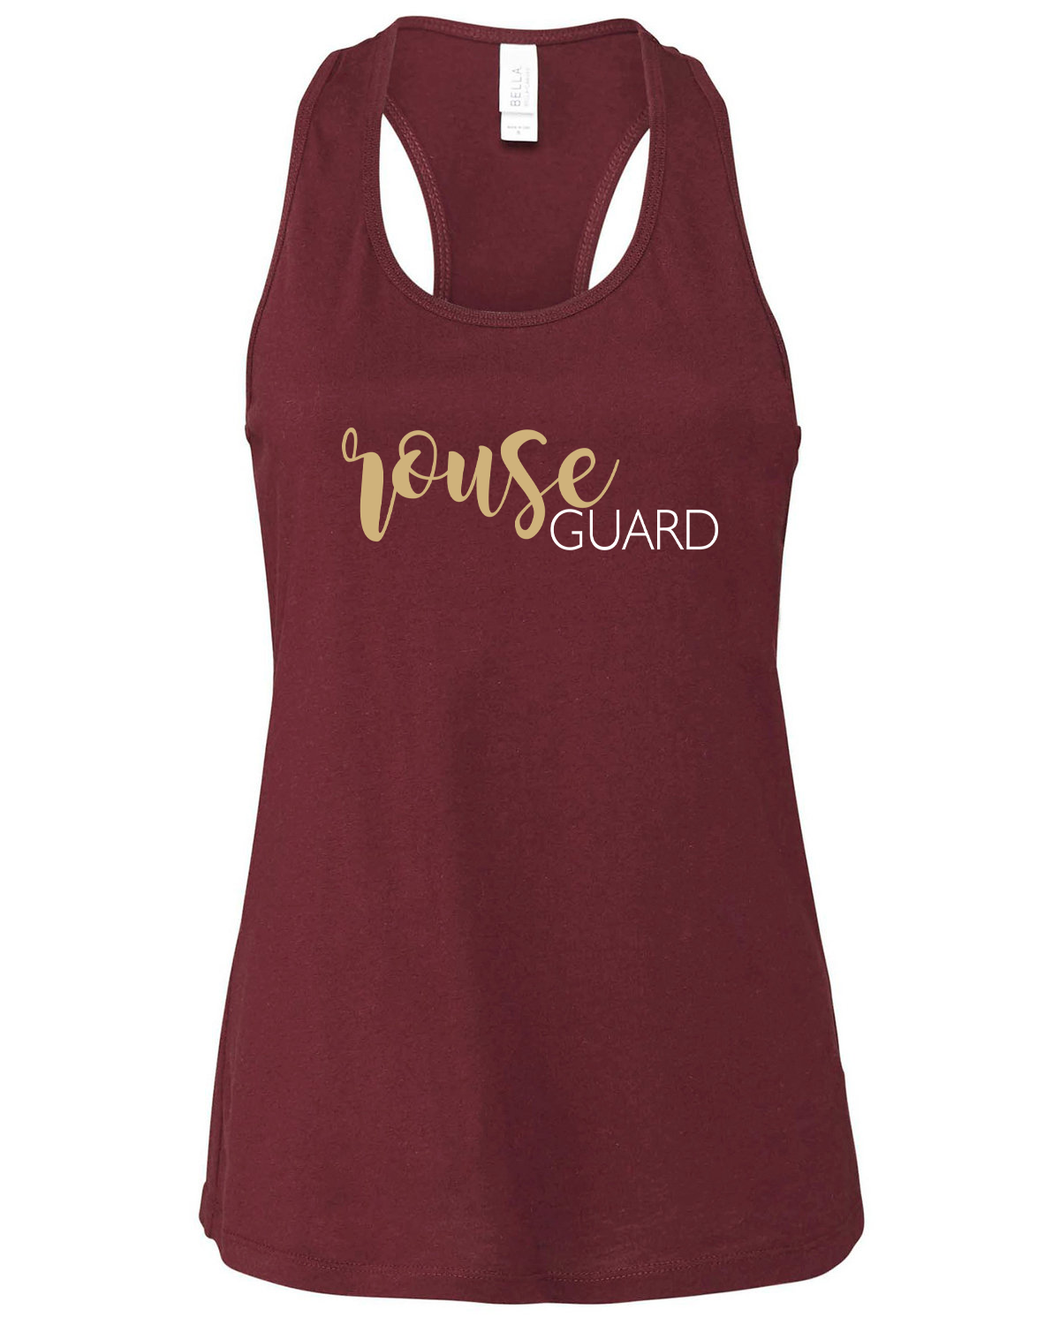 Rouse Guard Racer Back Tank Top